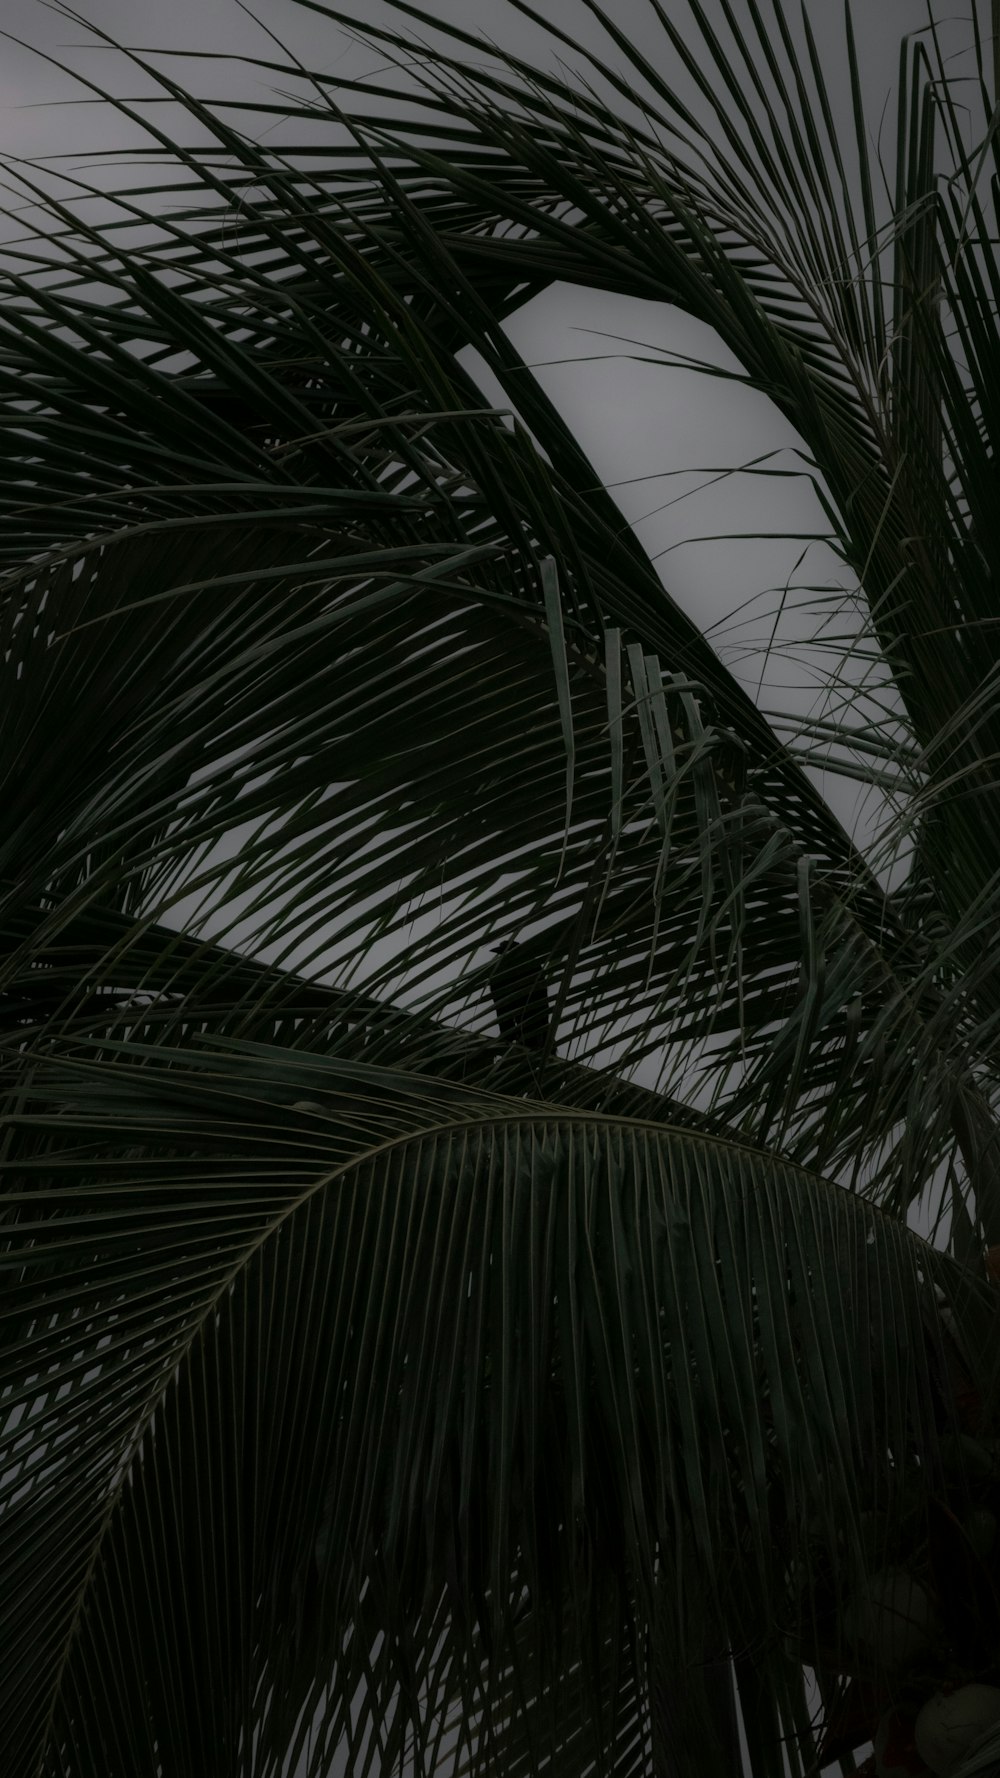 a palm tree is shown with the sky in the background